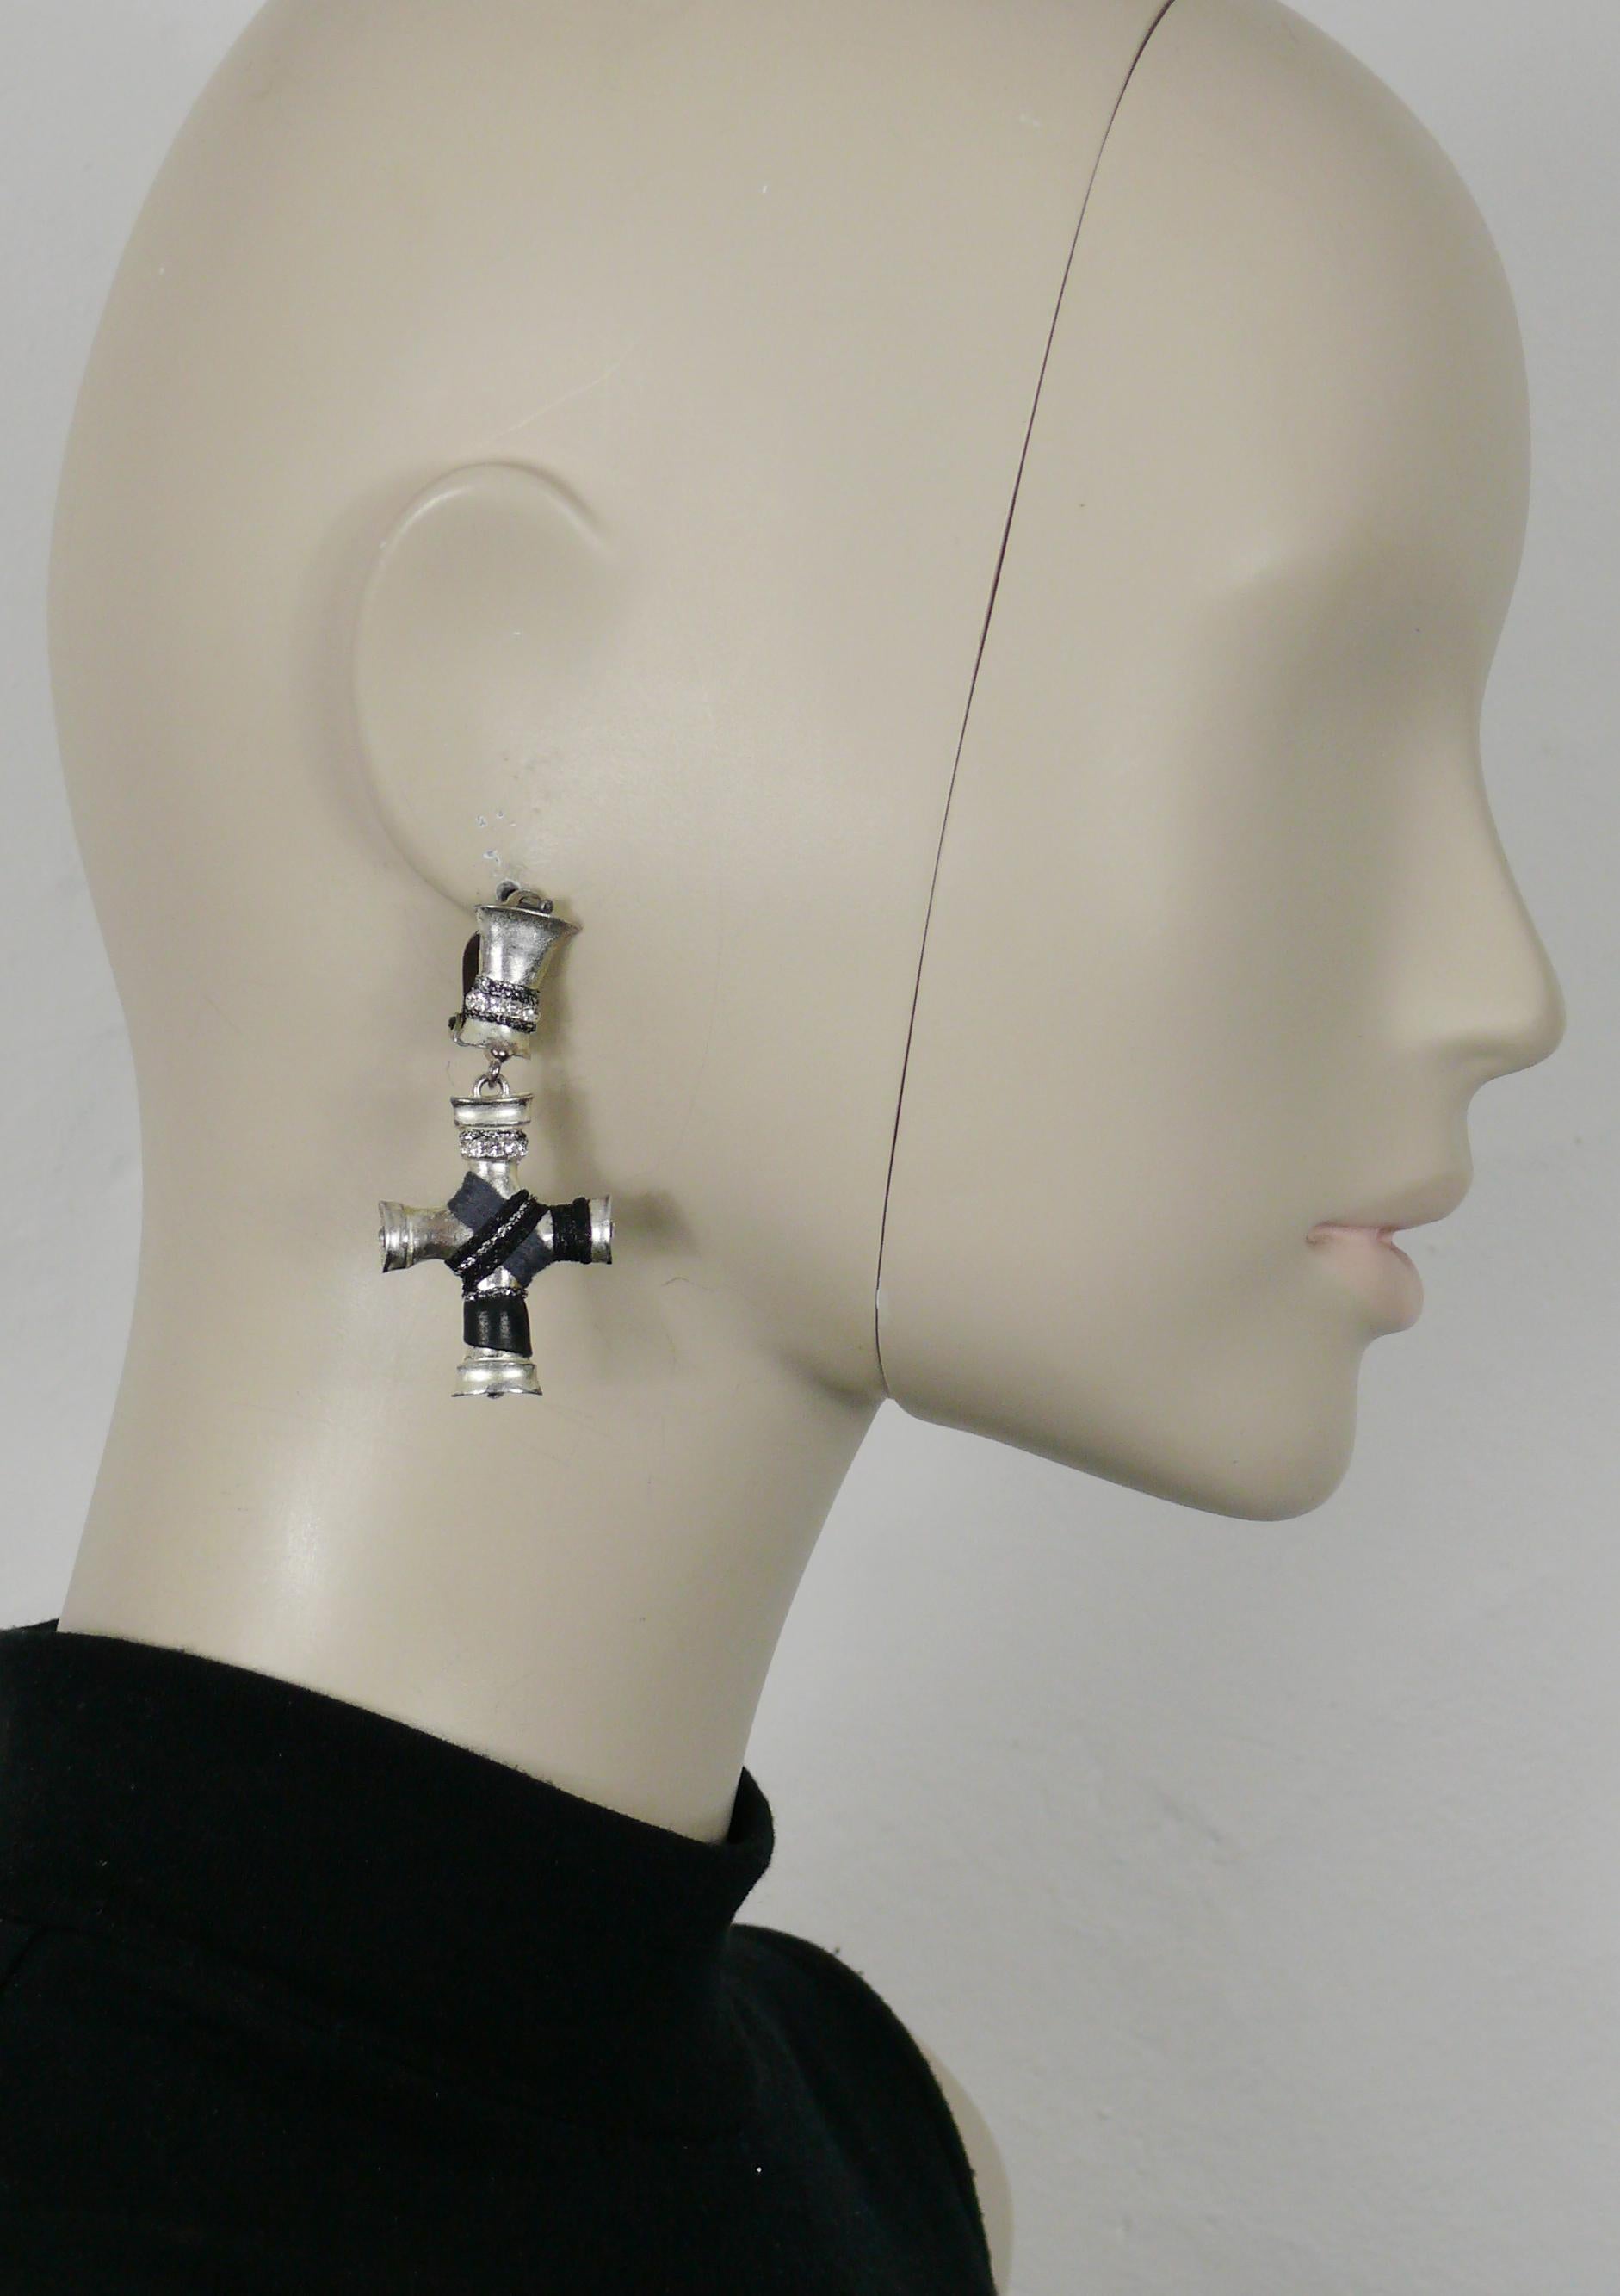 CHRISTIAN LACROIX vintage silver tone cross dangling earrings (clip-on) embellished with fabrics, leather and clear crystals.

Marked CHRISTIAN LACROIX CL Made in France.

Indicative measurements : height approx. 5.5 cm (2.17 inches) / width approx.